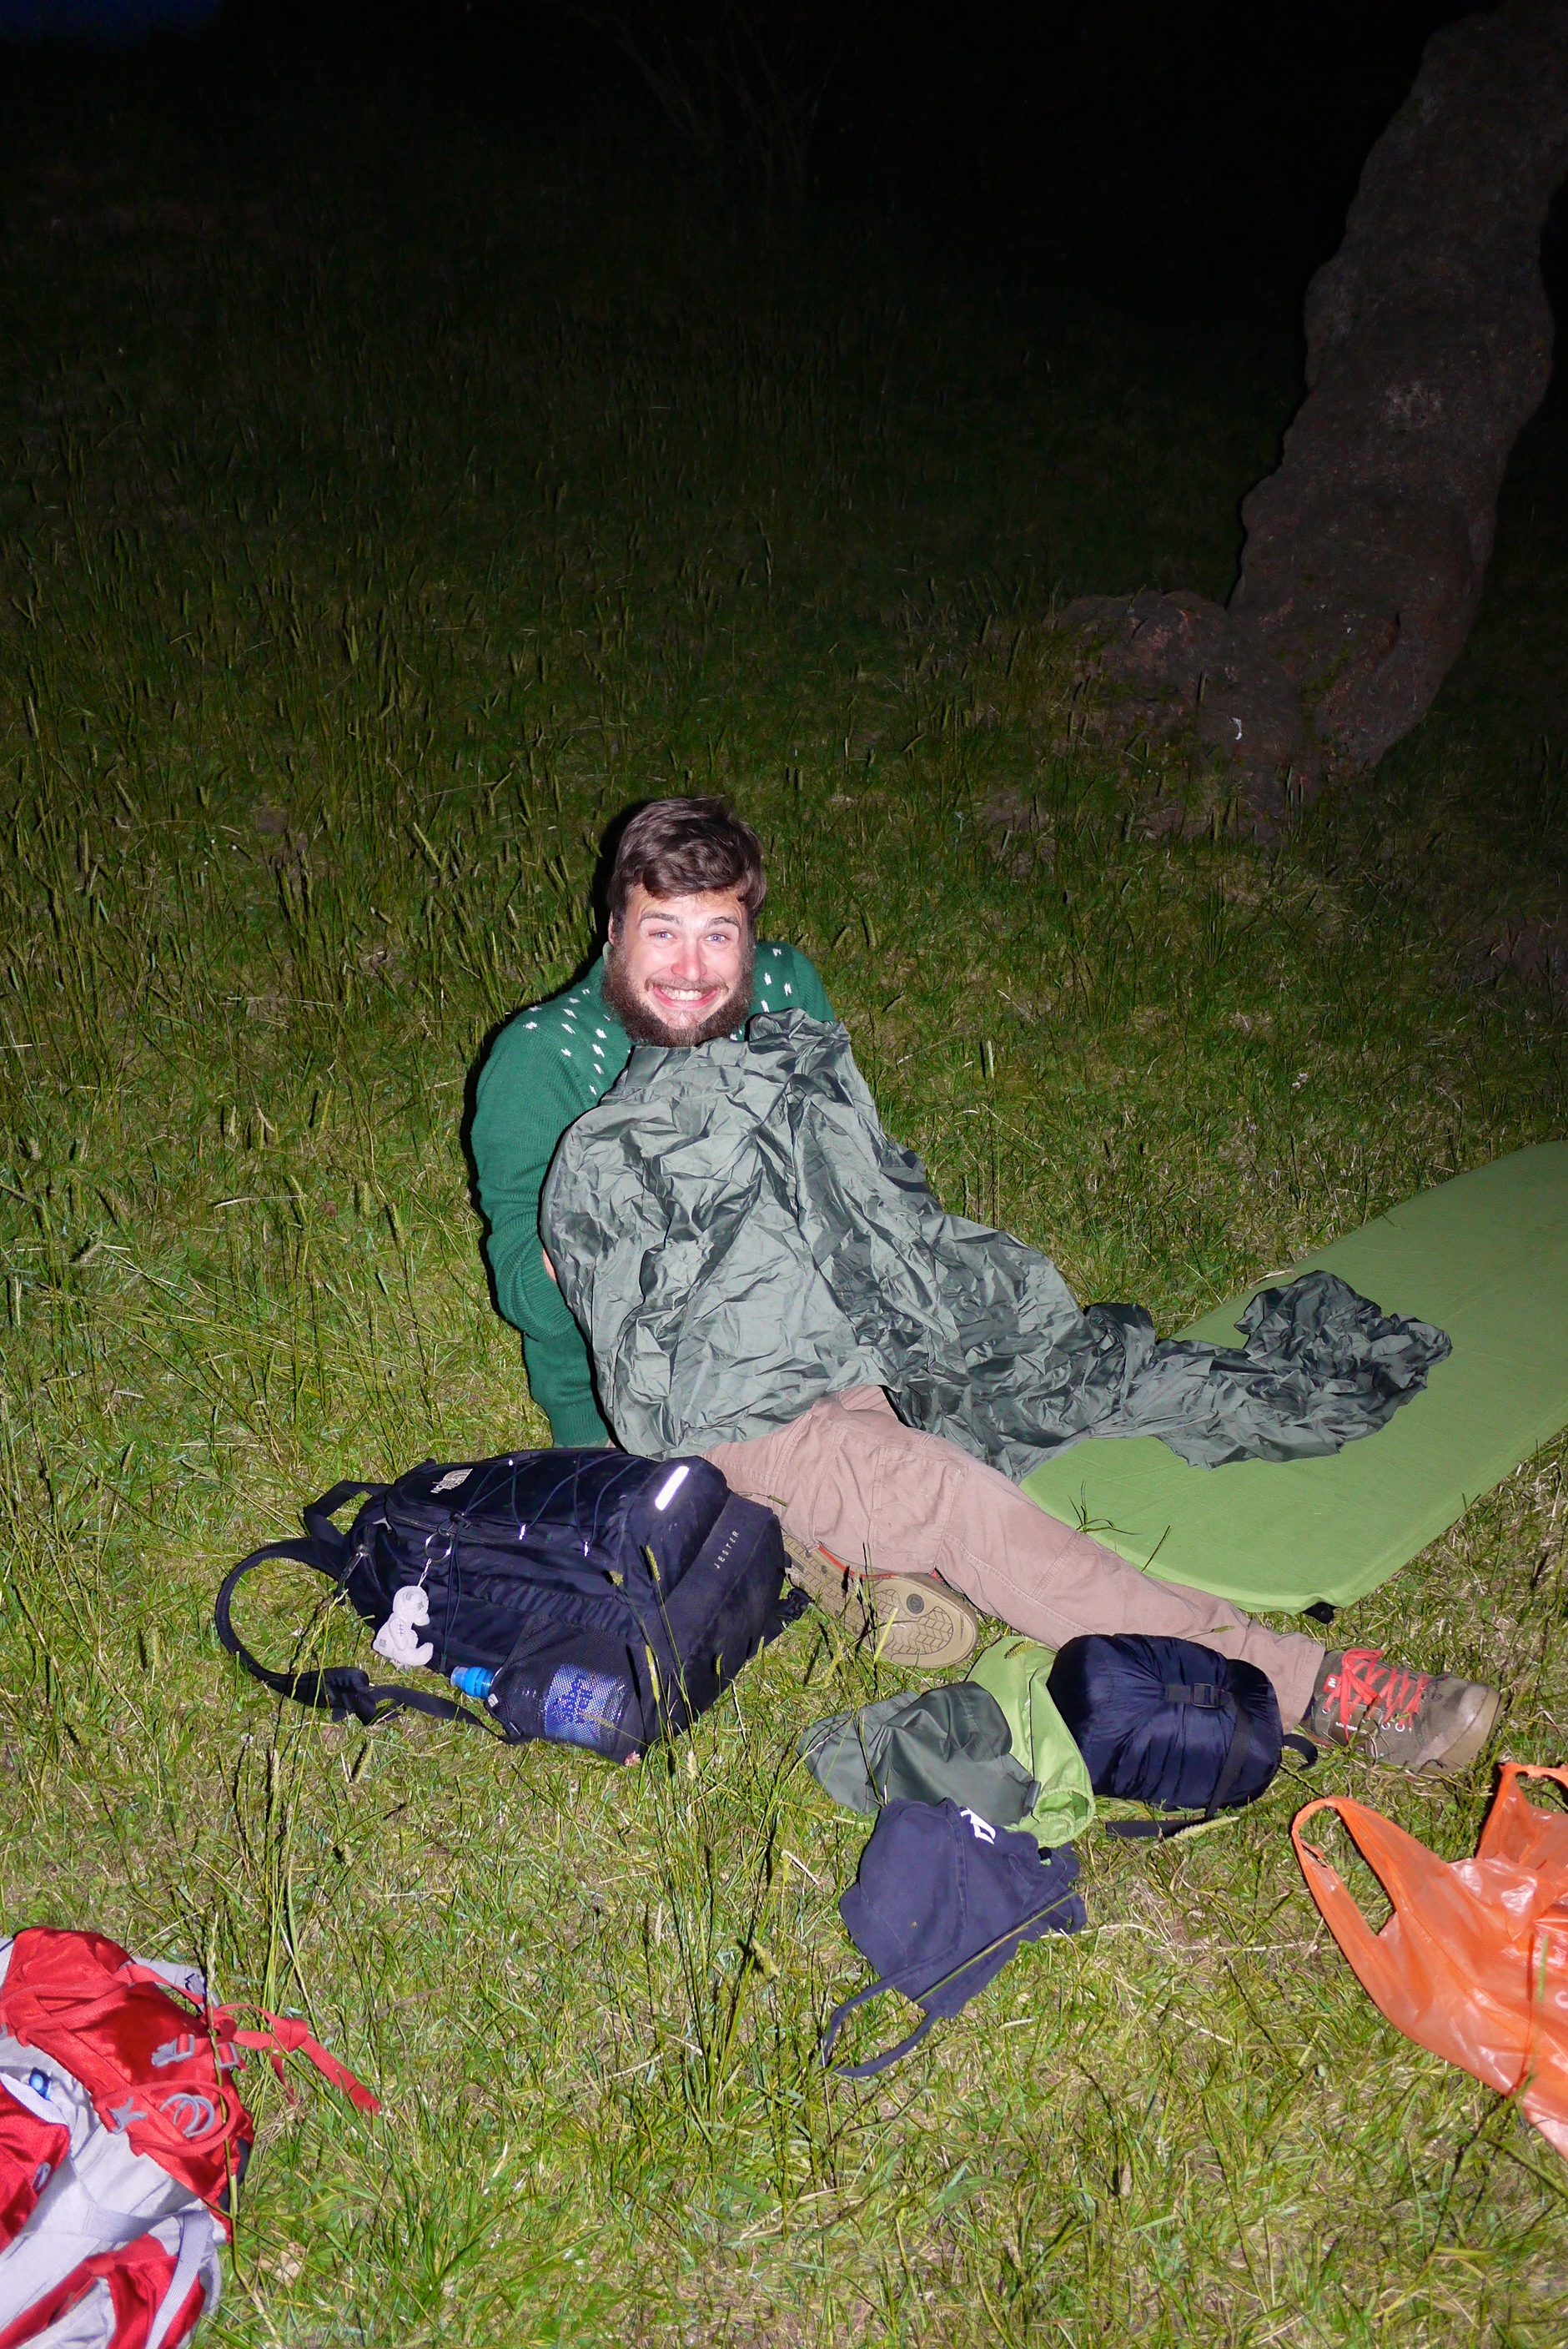 Rich gets very excited about popping his microadventure cherry